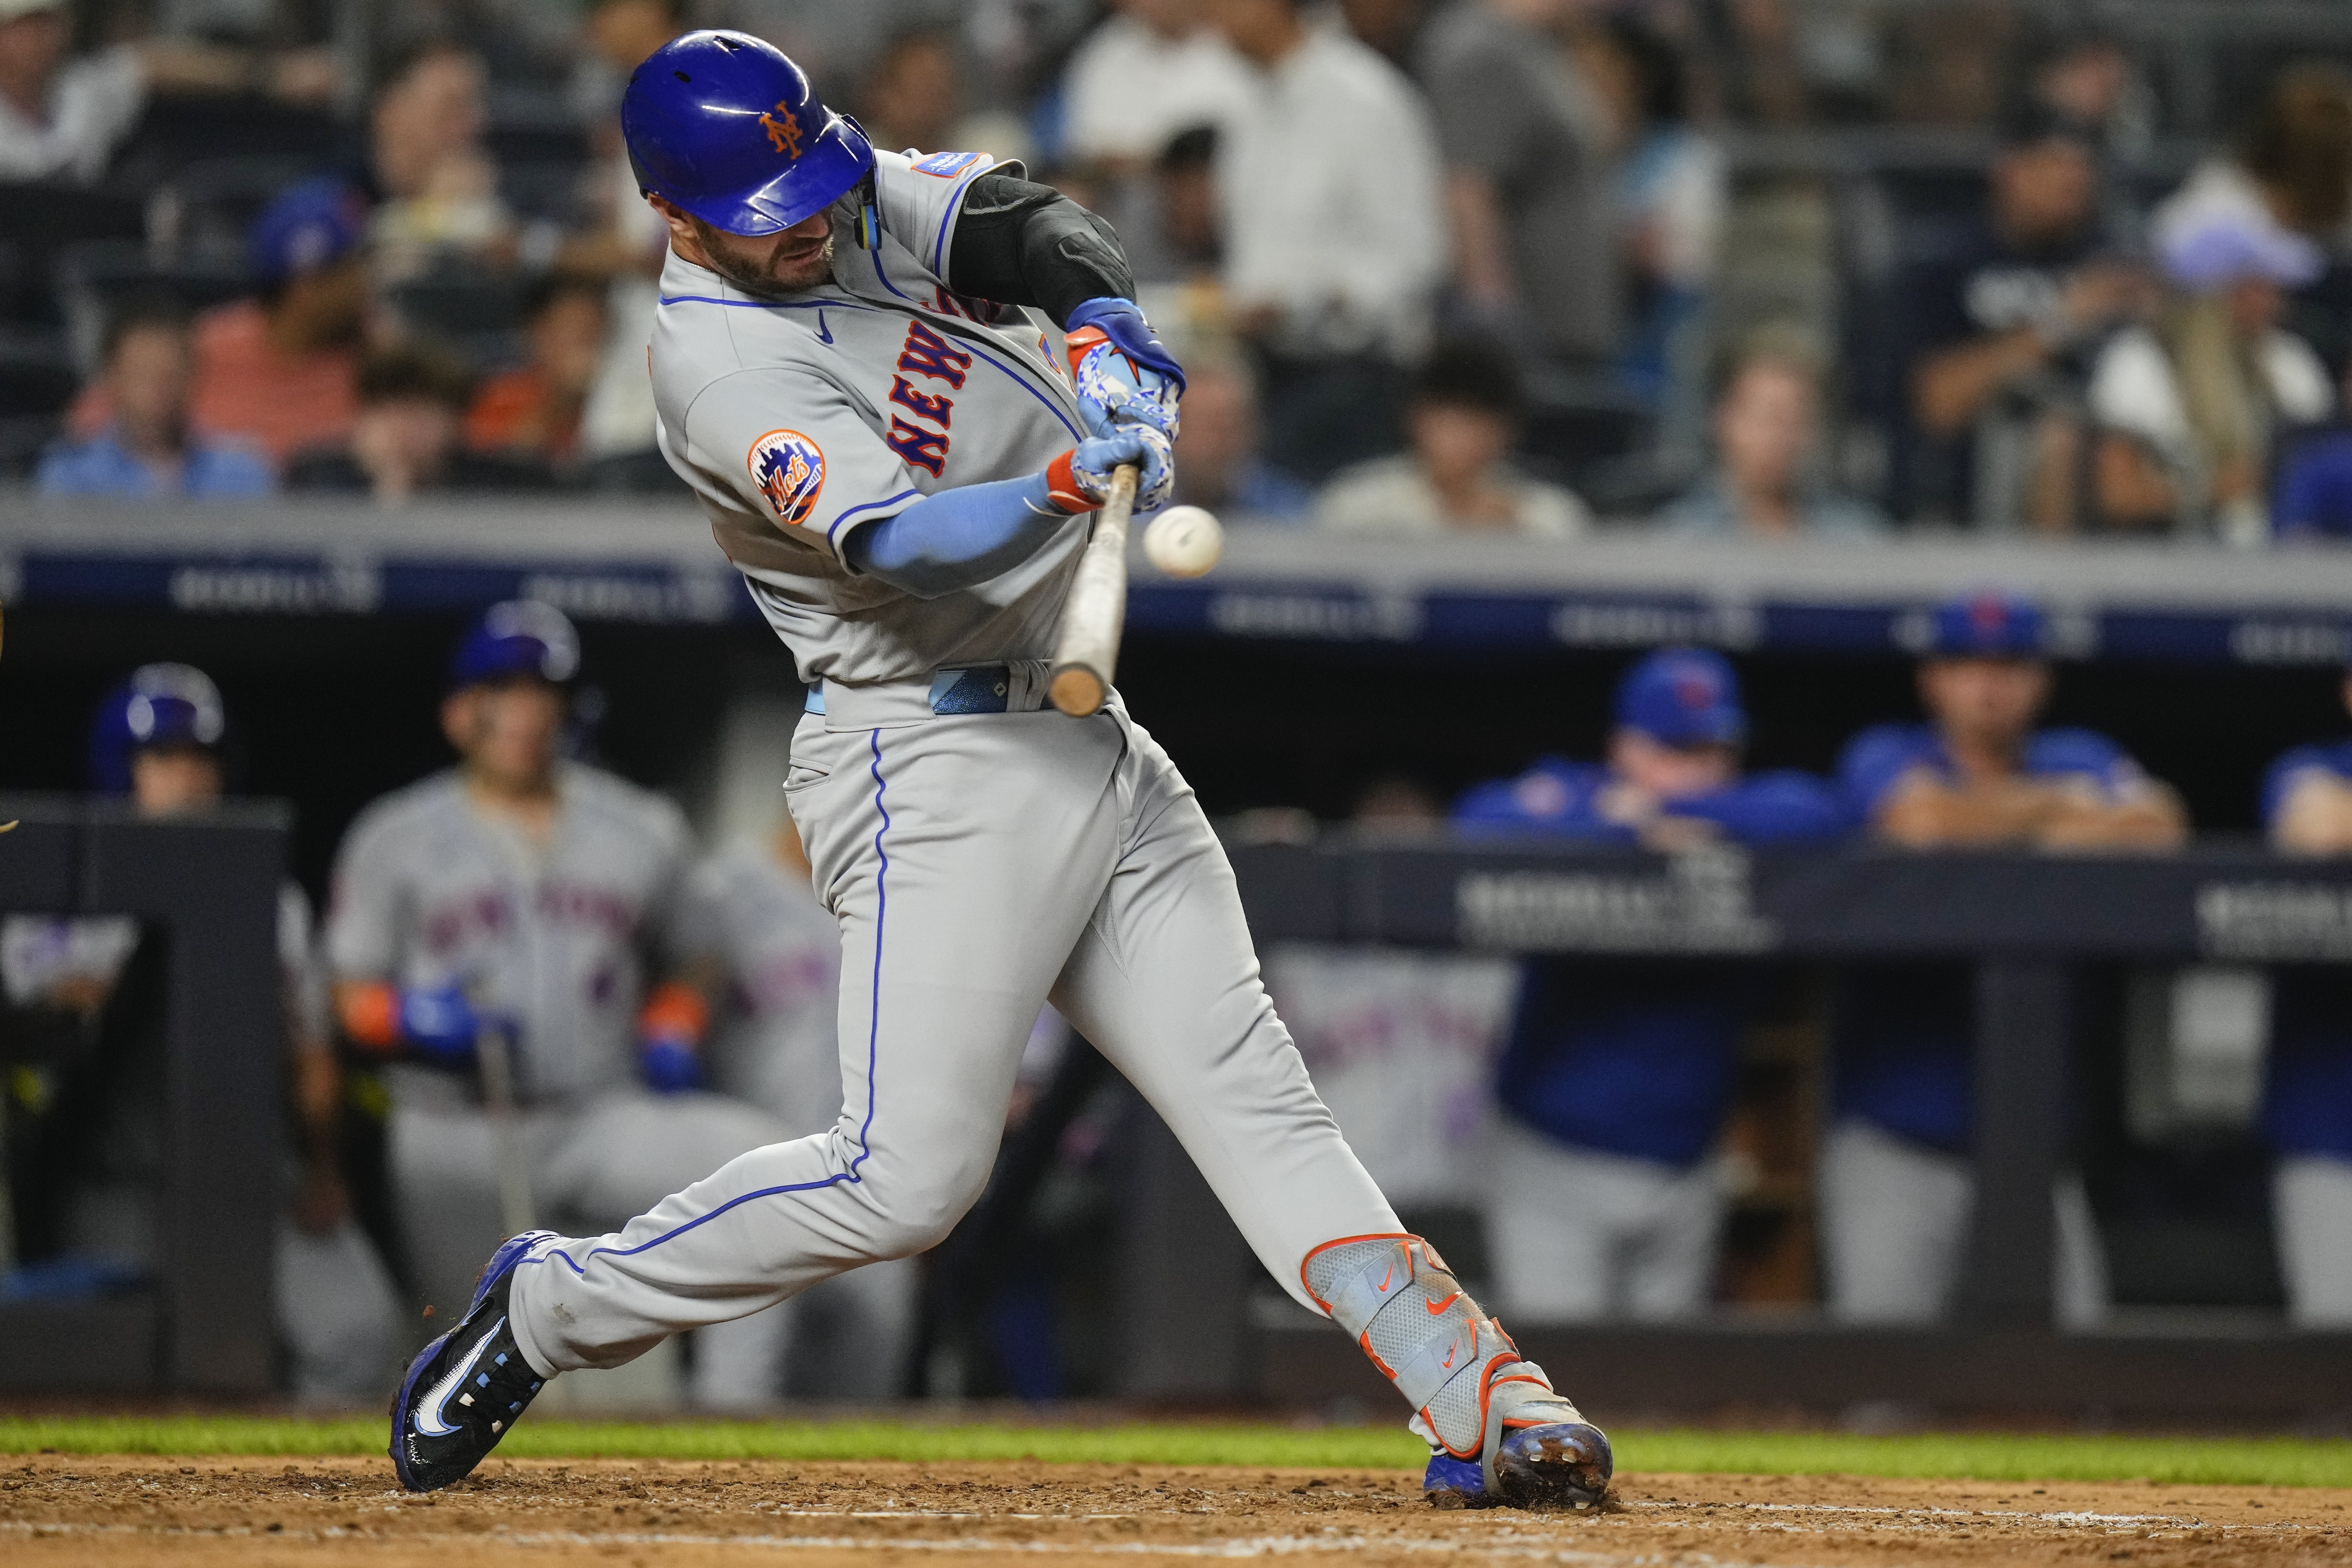 Pete Alonso reaches 40 home runs for Mets to join exclusive club